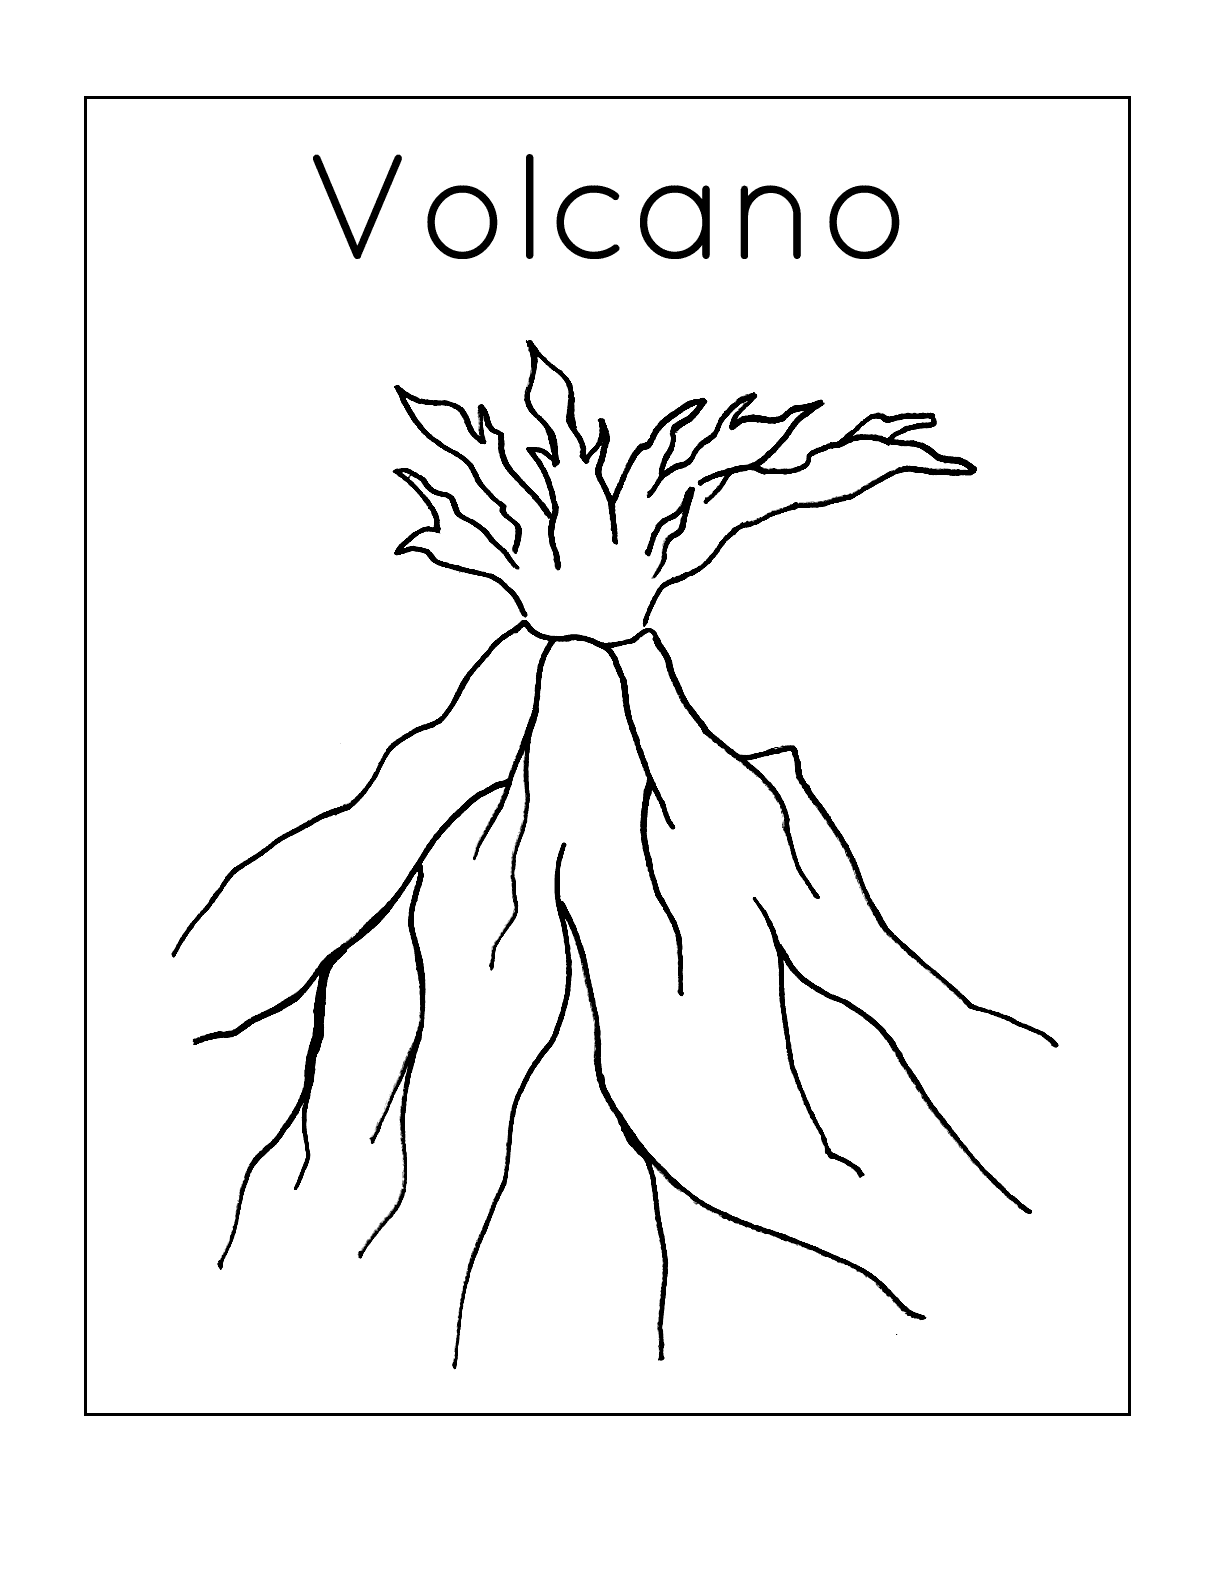 Firey Volcano Coloring Page